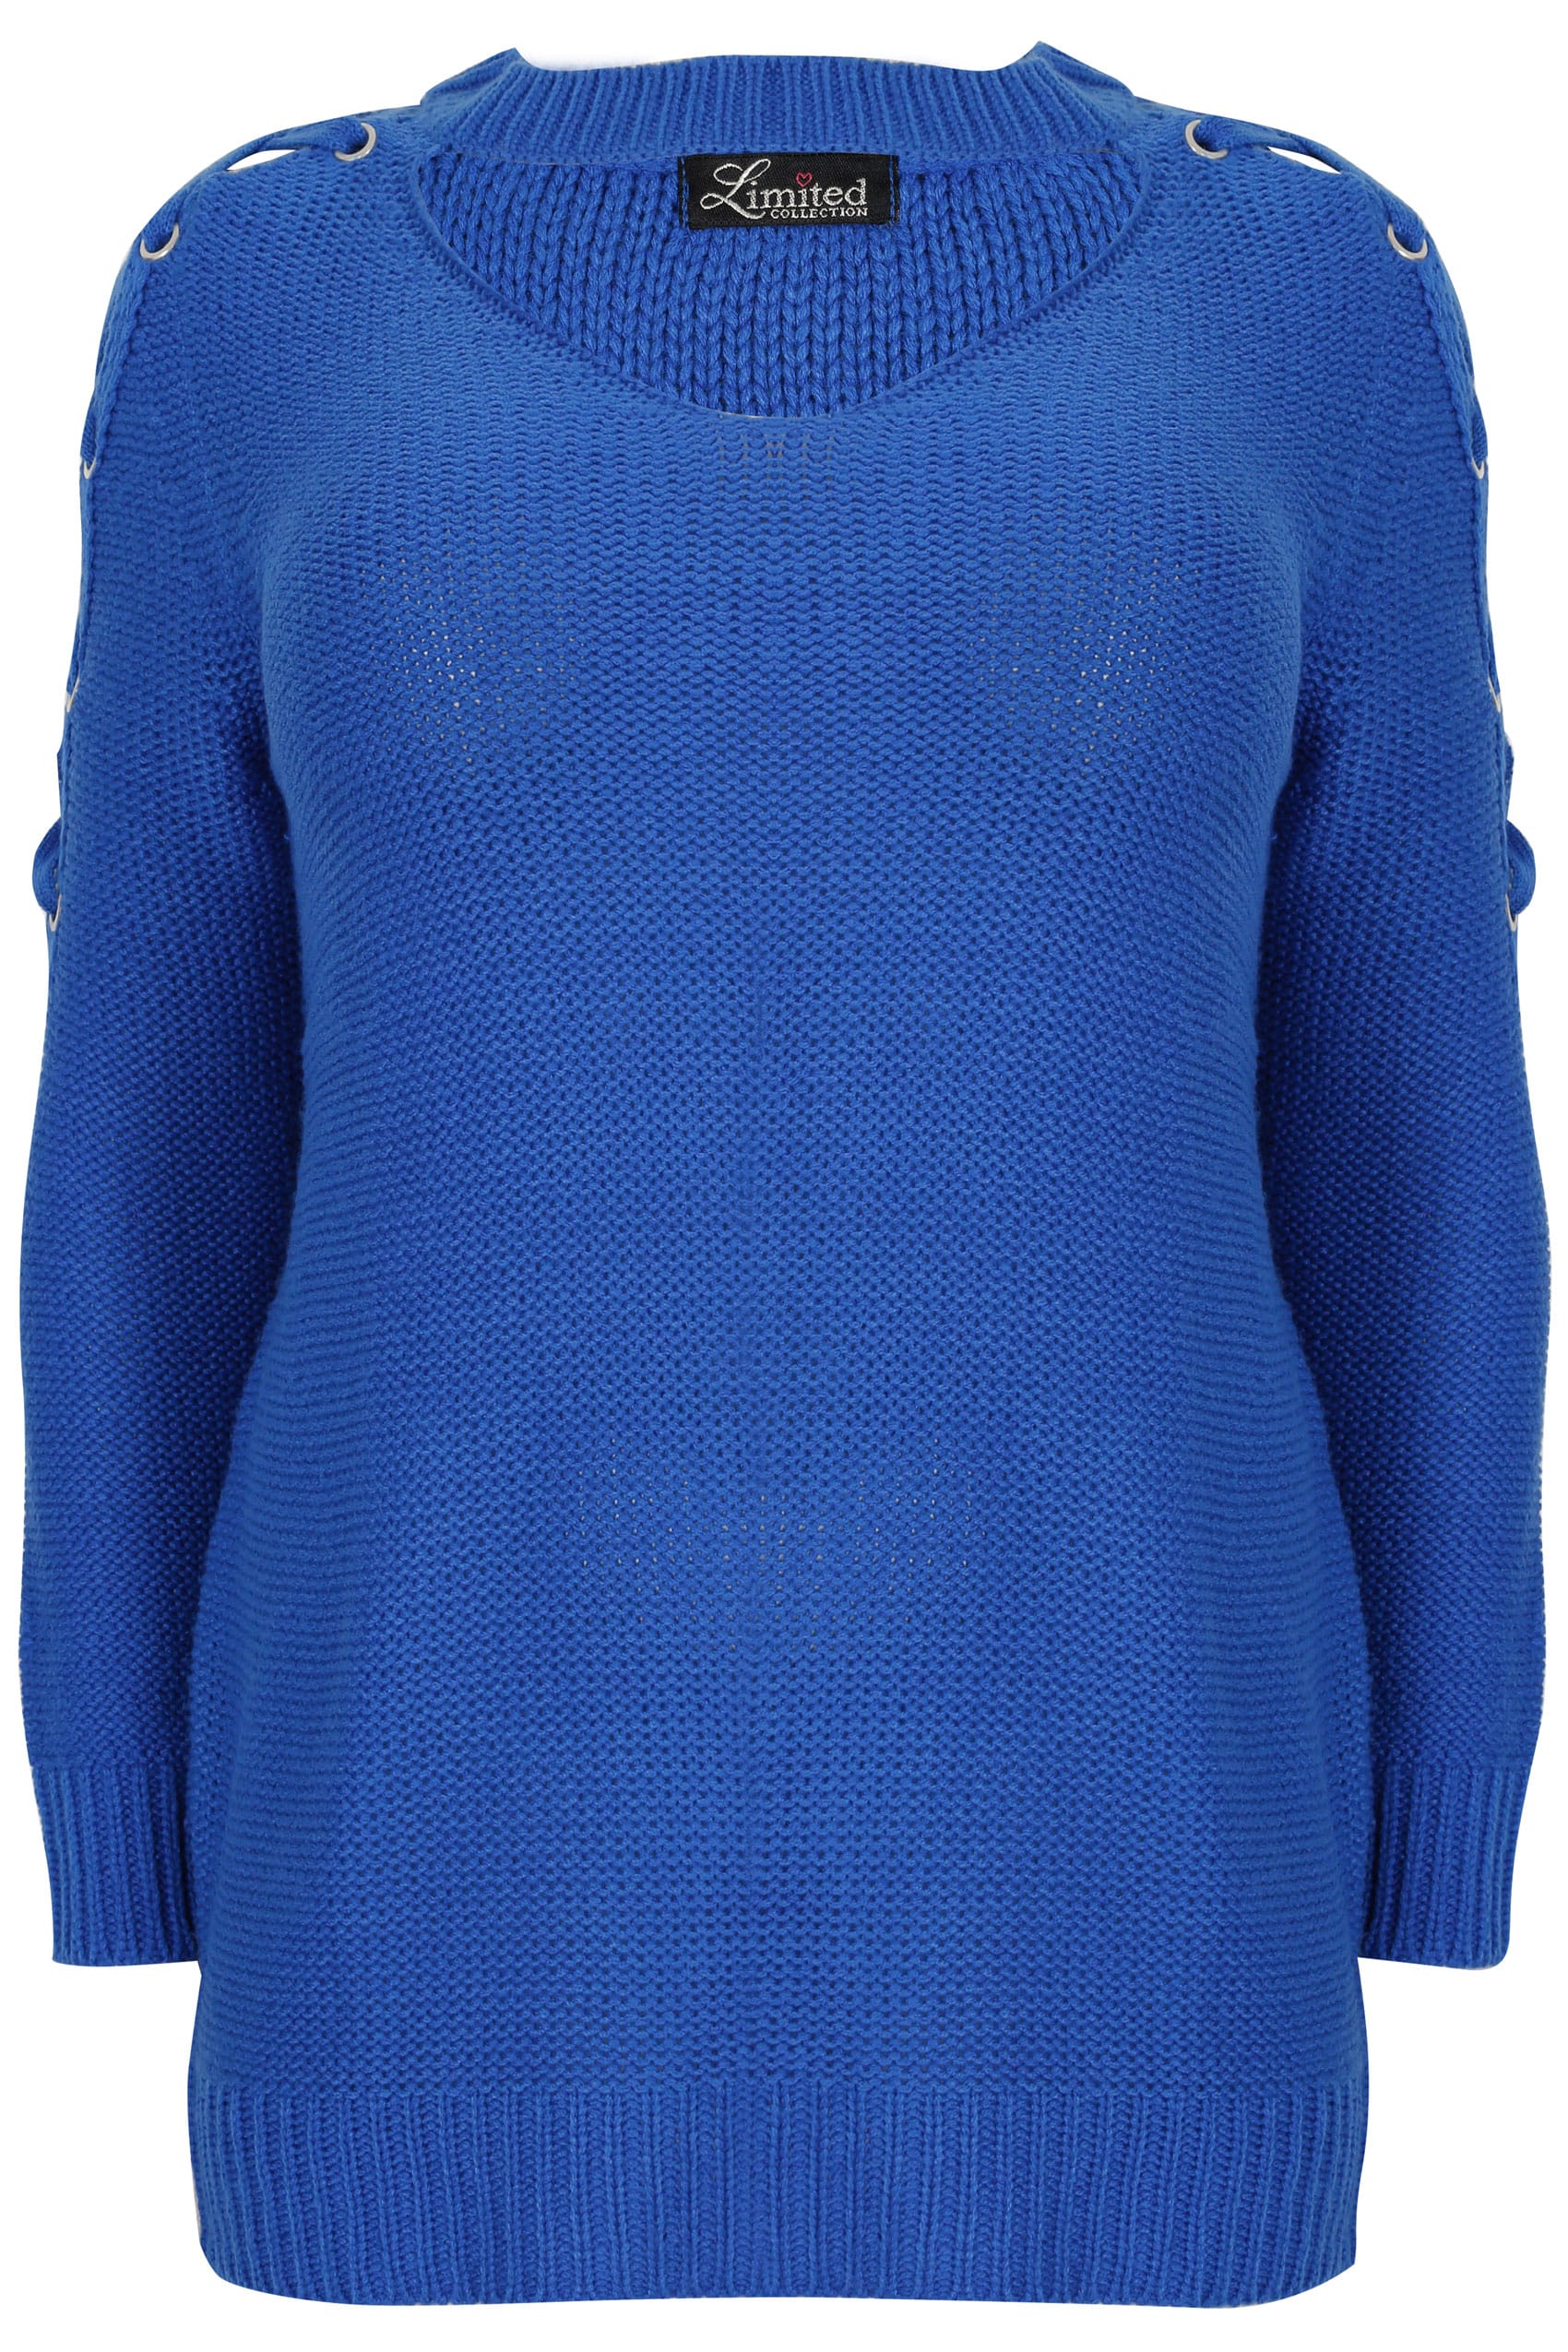 LIMITED COLLECTION Royal Blue Choker Jumper With Lace Sleeves, Plus